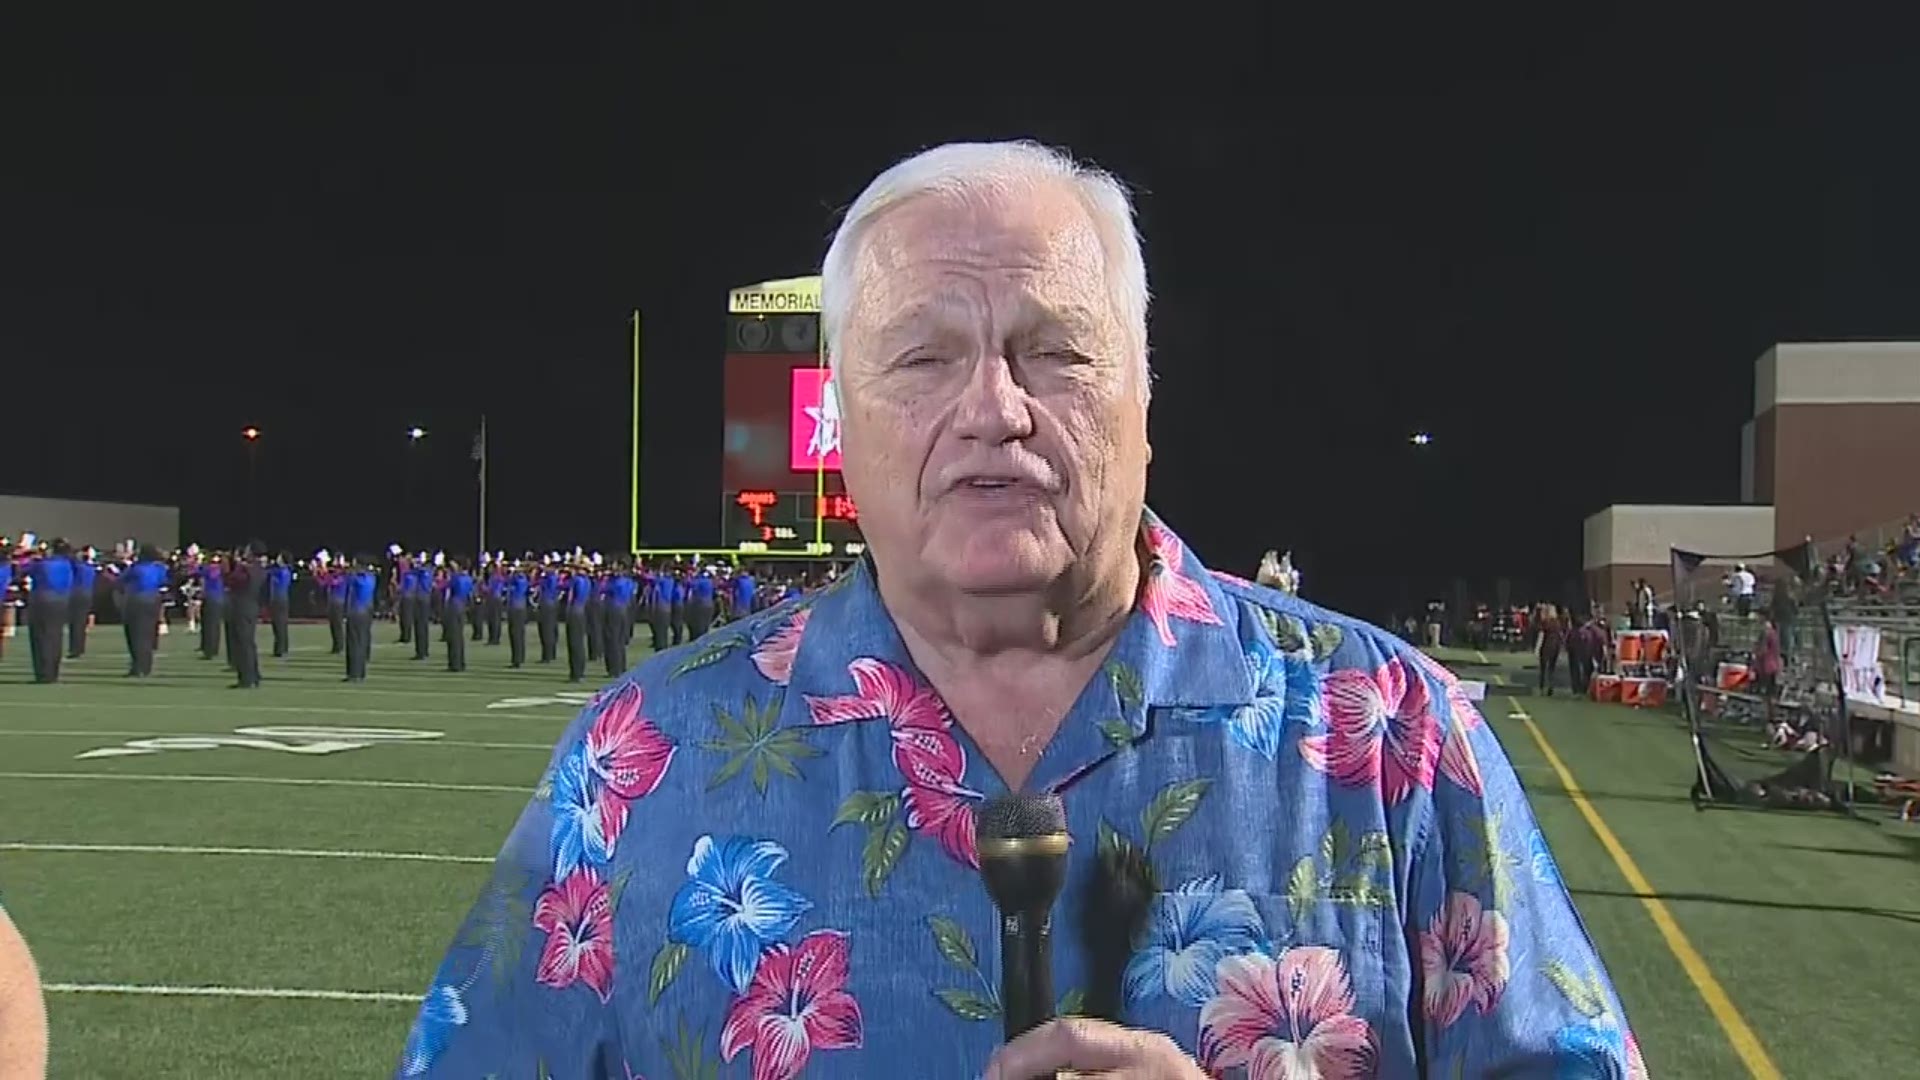 GAMEOFTHEWEEK: It's week four of the high school football season and Dale Hansen is at our game of the week Mesquite vs. Mesquite Horn.